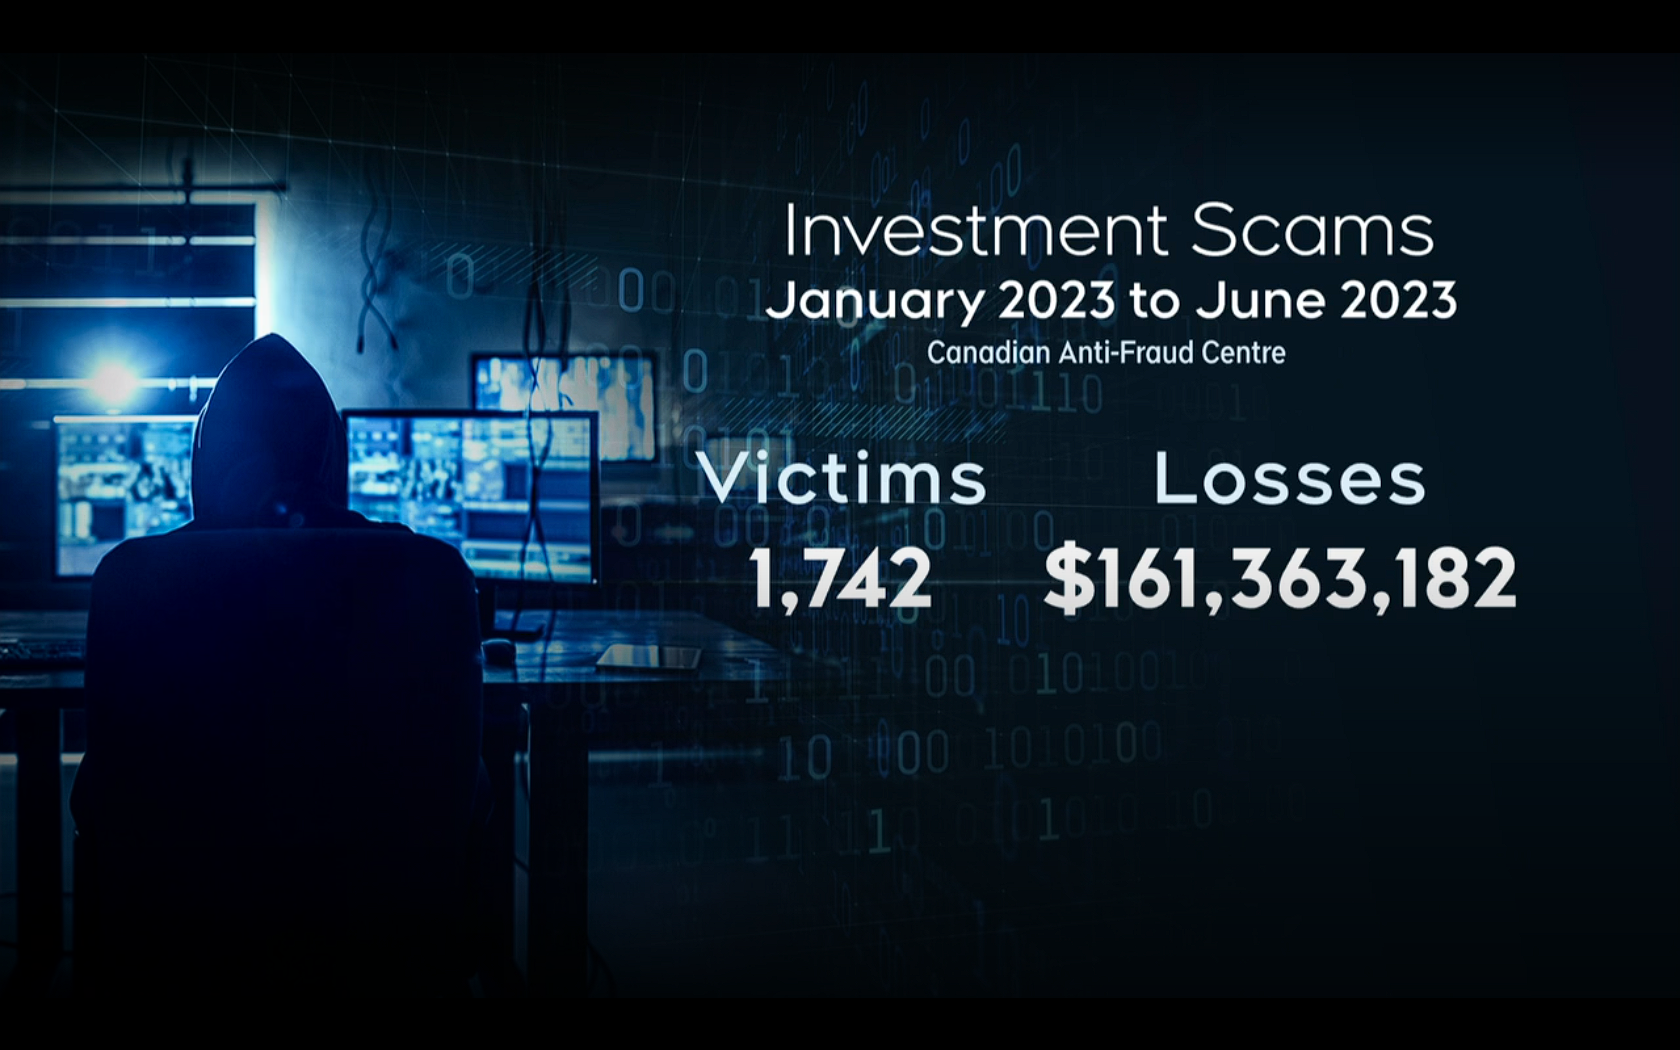 1,742 victims lost $16,363,182 in investment scams during the first half of 2023 alone